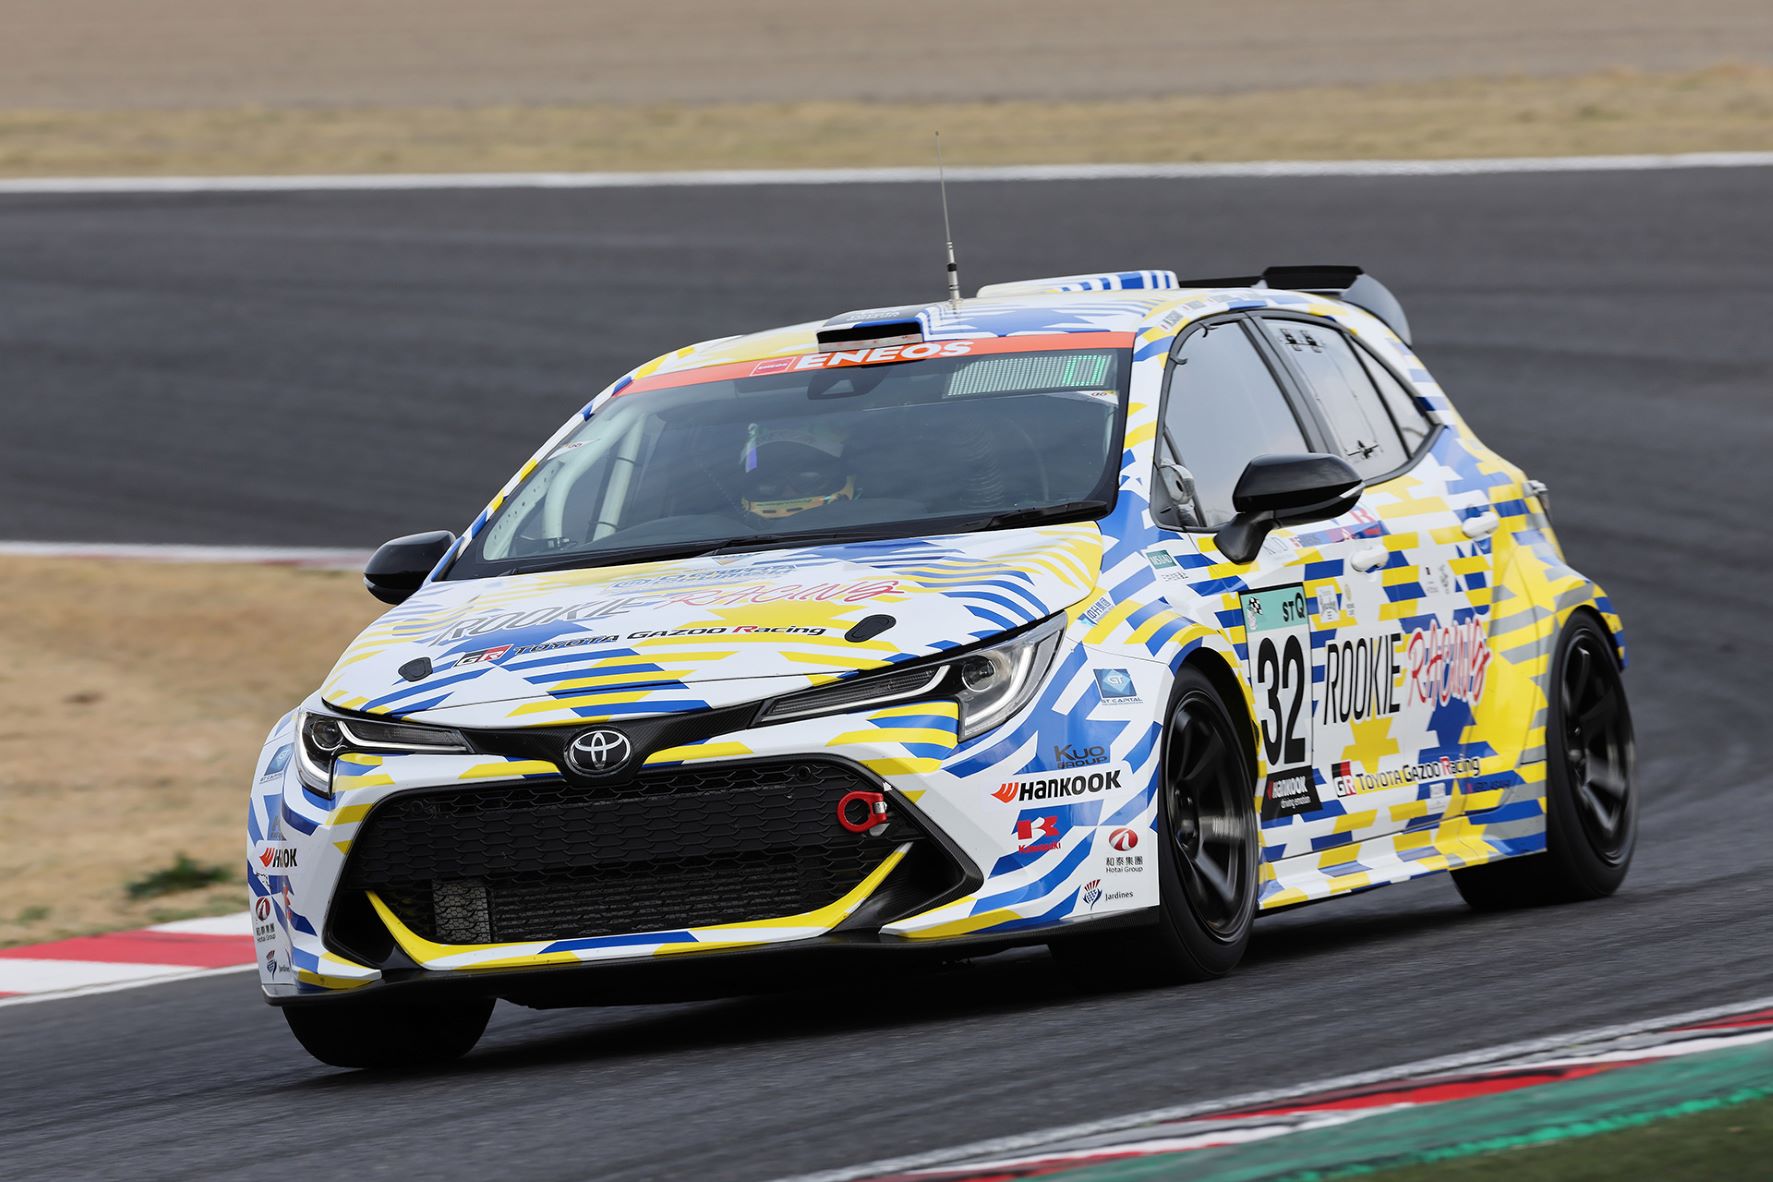 A Hydrogen powered Toyota Corolla race car being tested